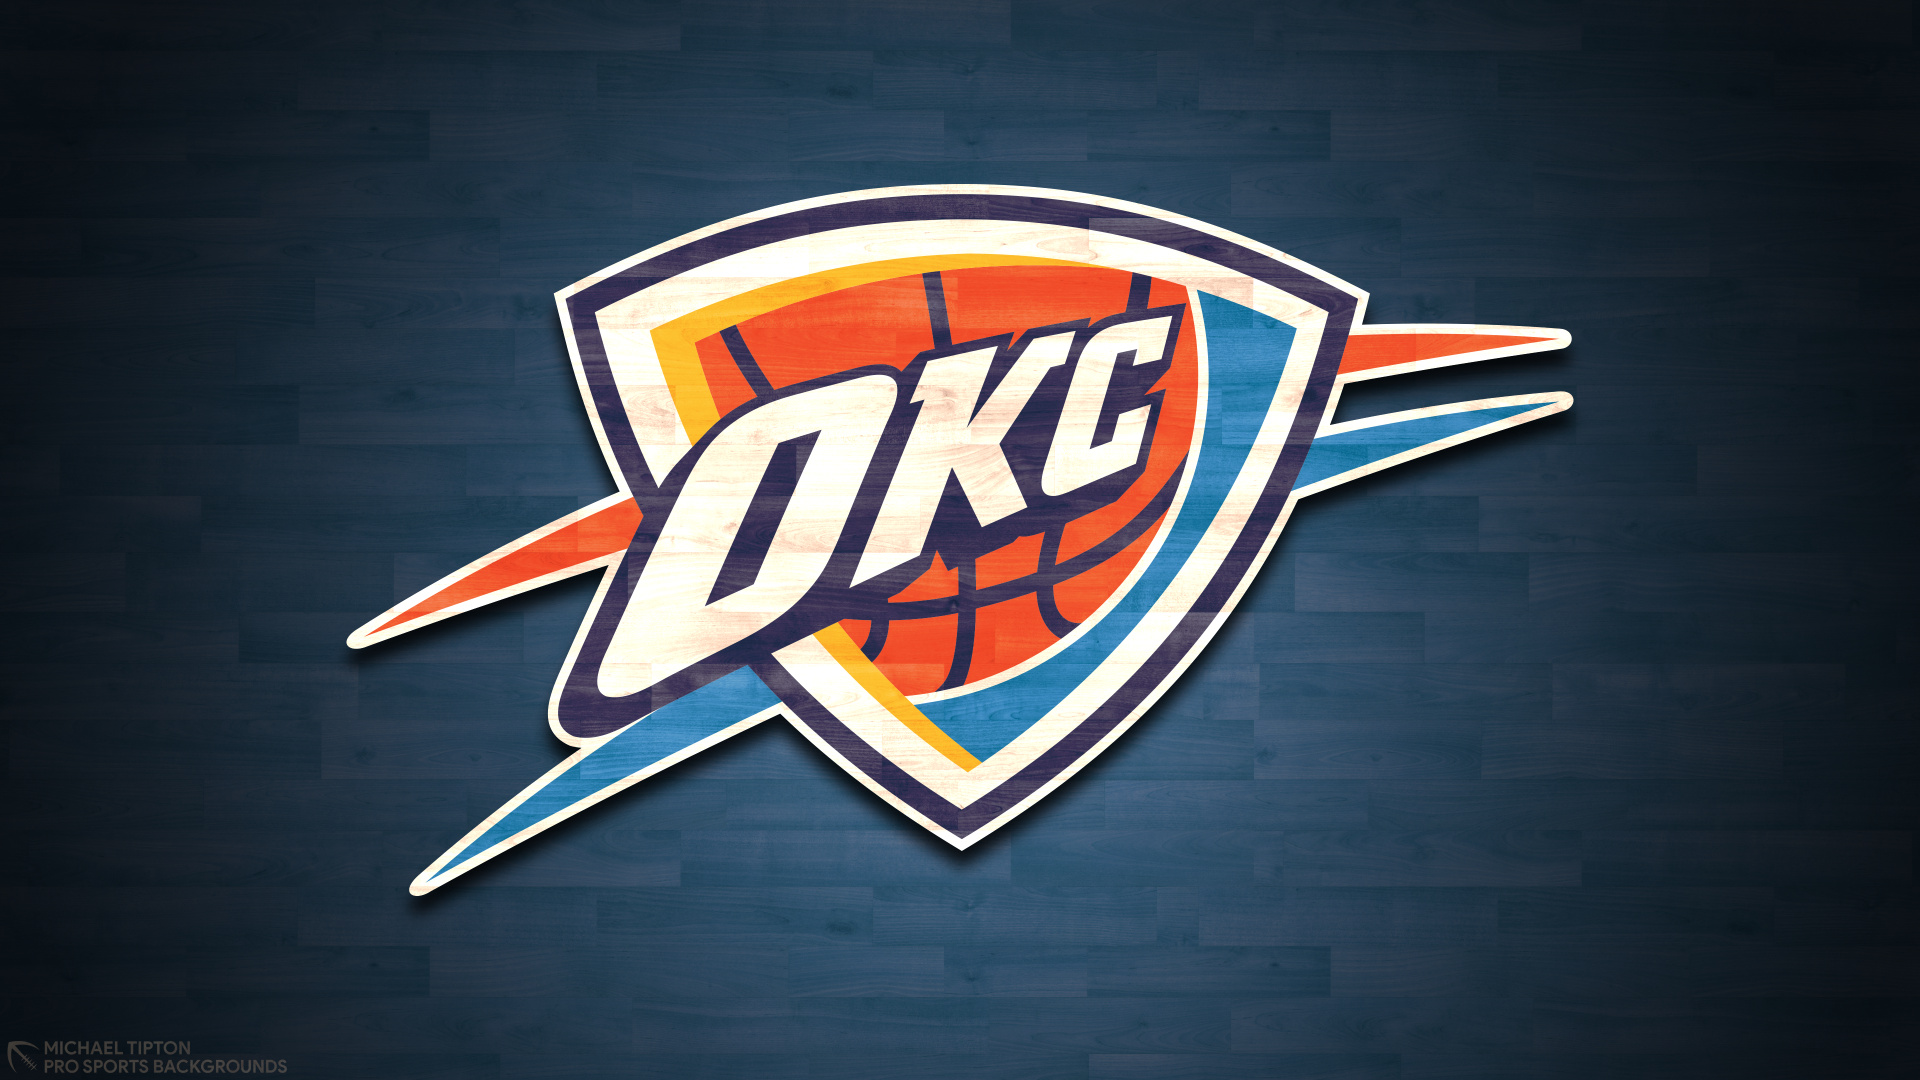 Oklahoma City Thunder, Ultra HD wallpapers, Basketball background images, Sports team, 1920x1080 Full HD Desktop